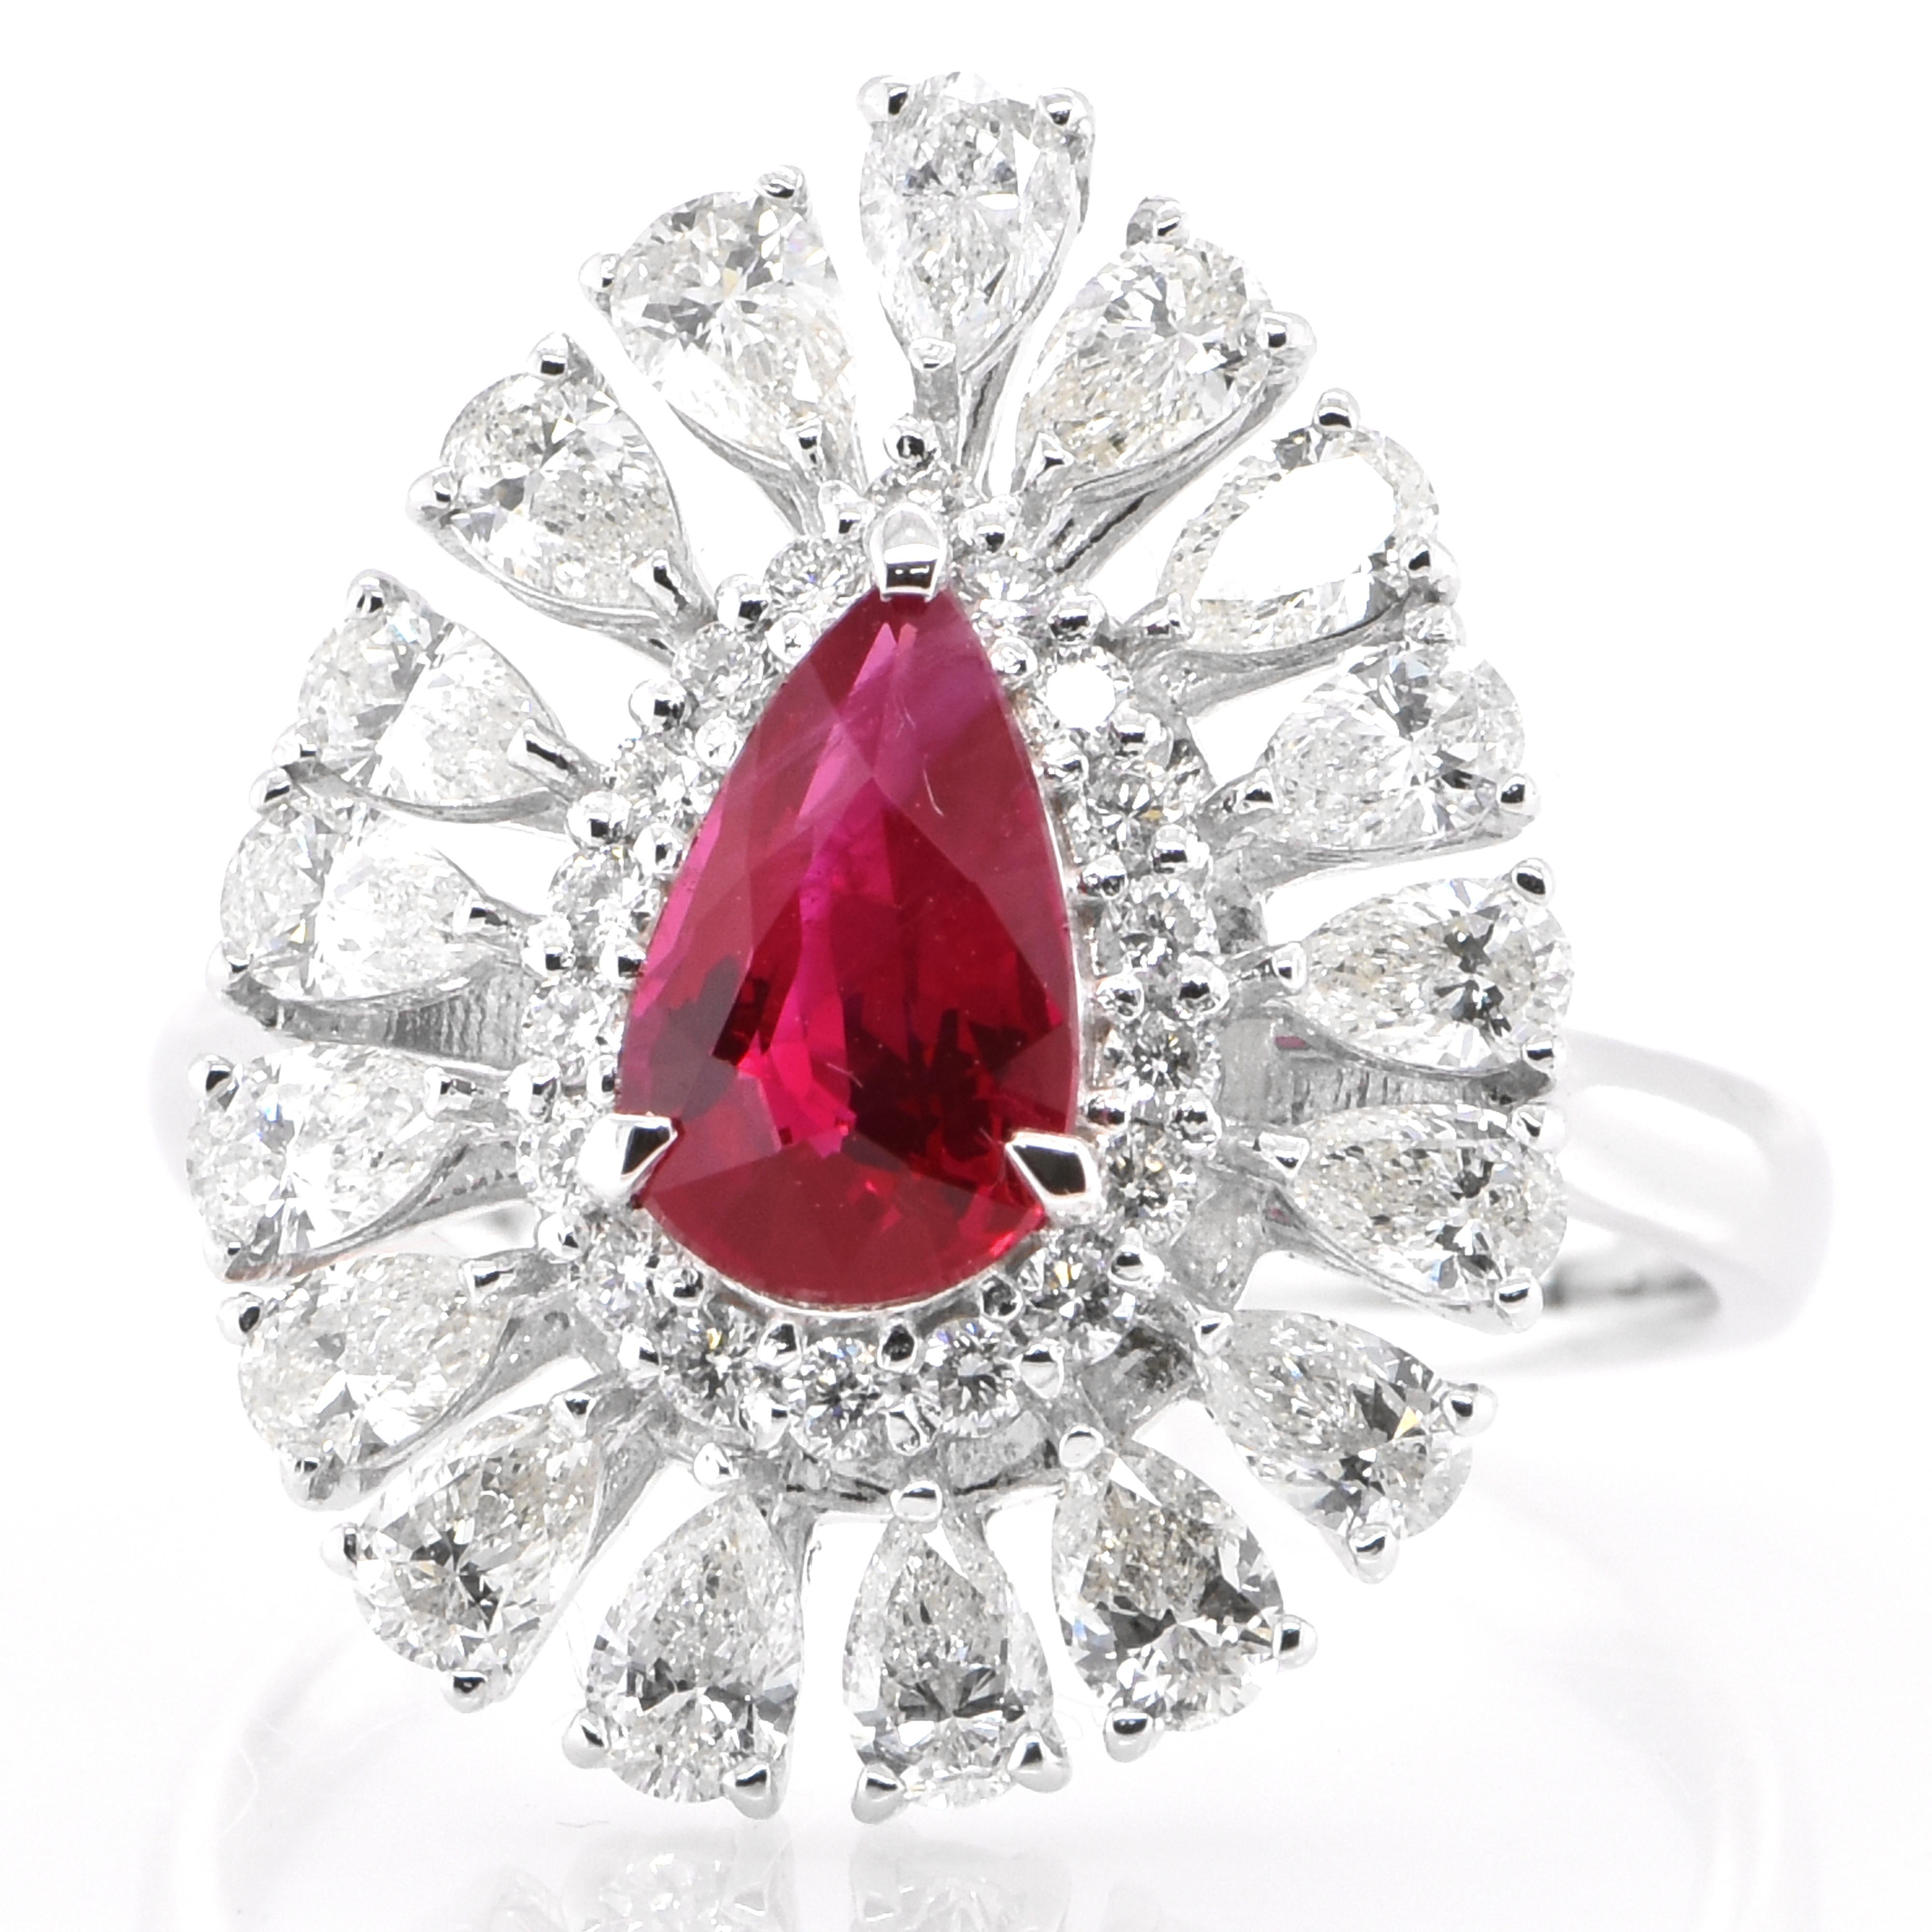 A beautiful ring set in Platinum featuring a GIA Certified 1.05 Carat Natural, Burmese (Myanmar) Ruby and 1.47 Carat Diamonds. Rubies are referred to as 